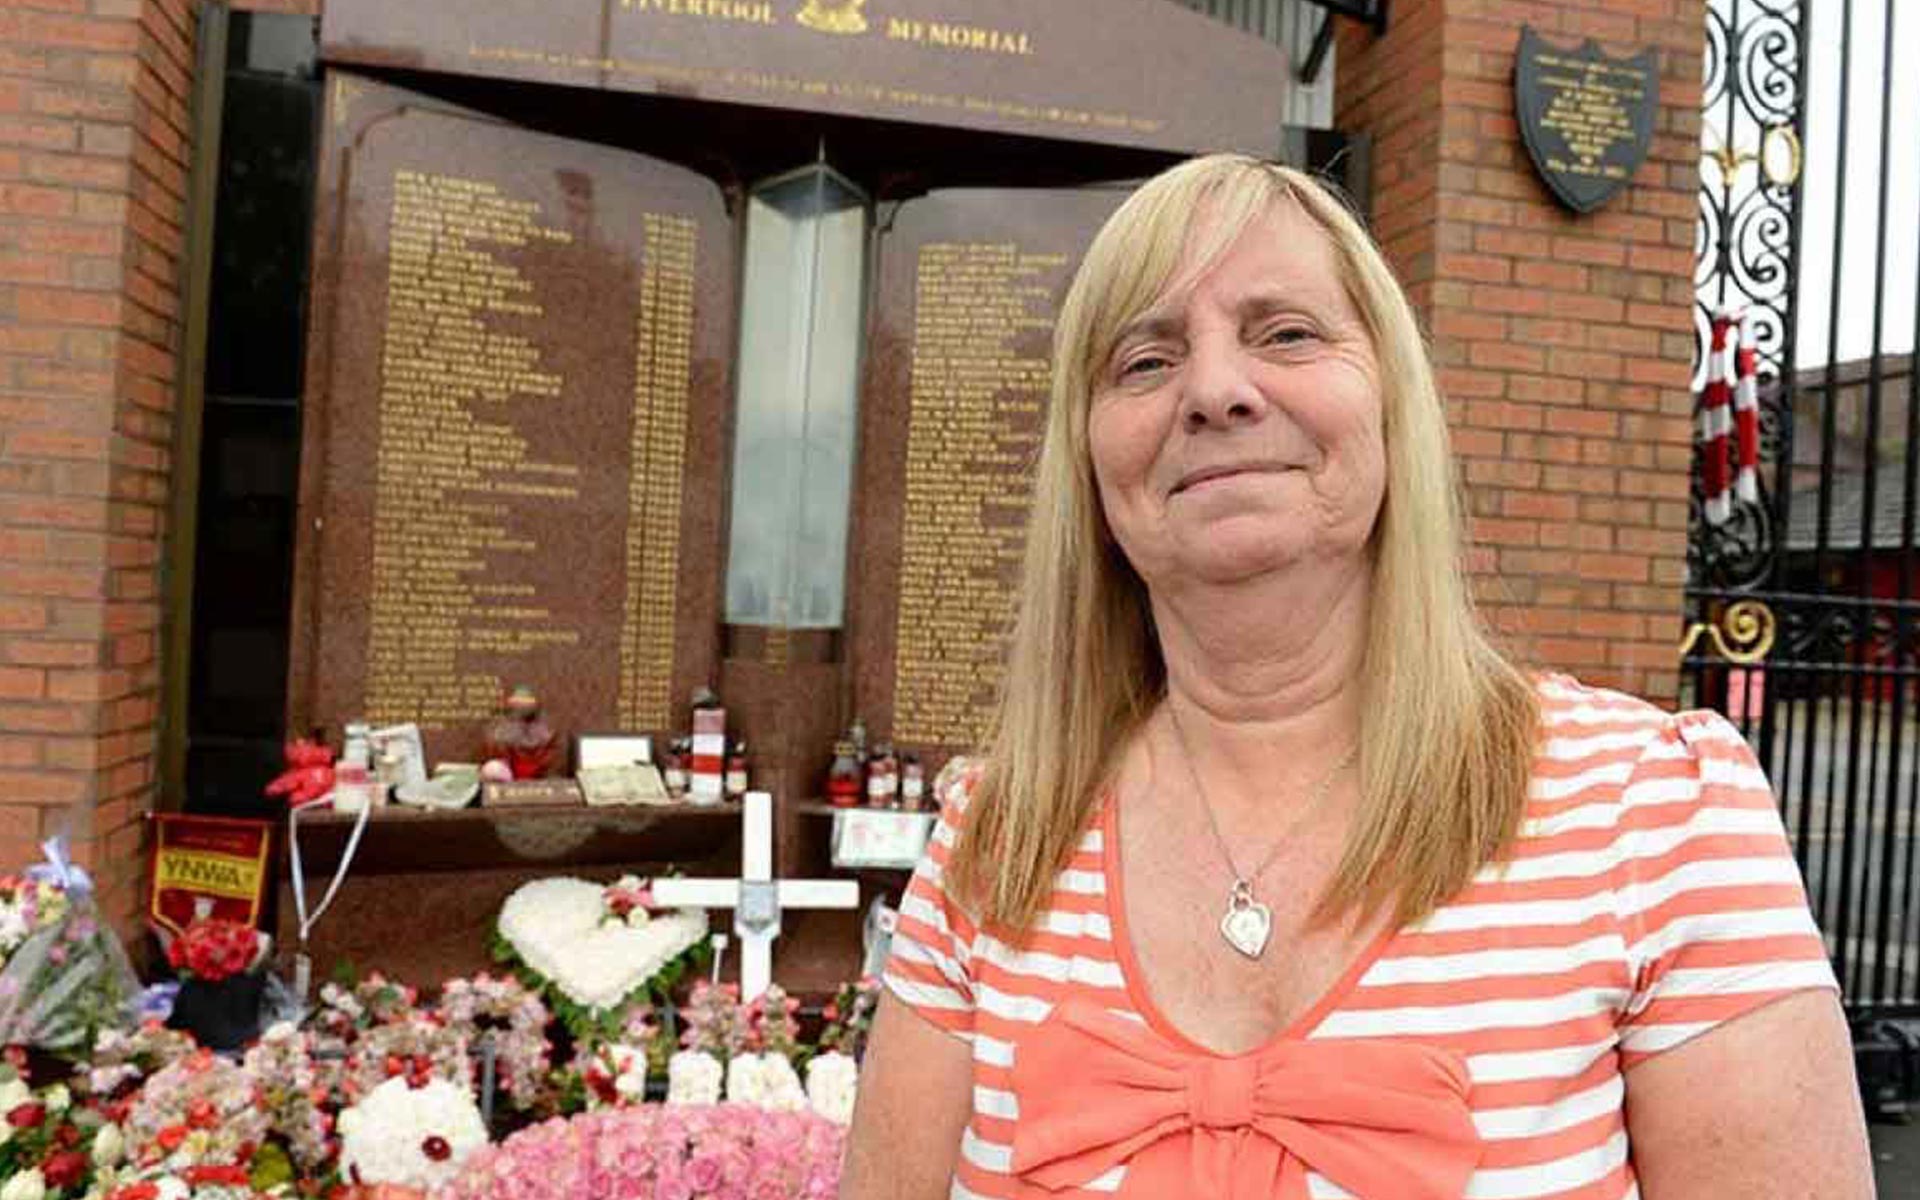 Special Recognition - The Hillsborough Families, presented to campaigner Margaret Aspinall